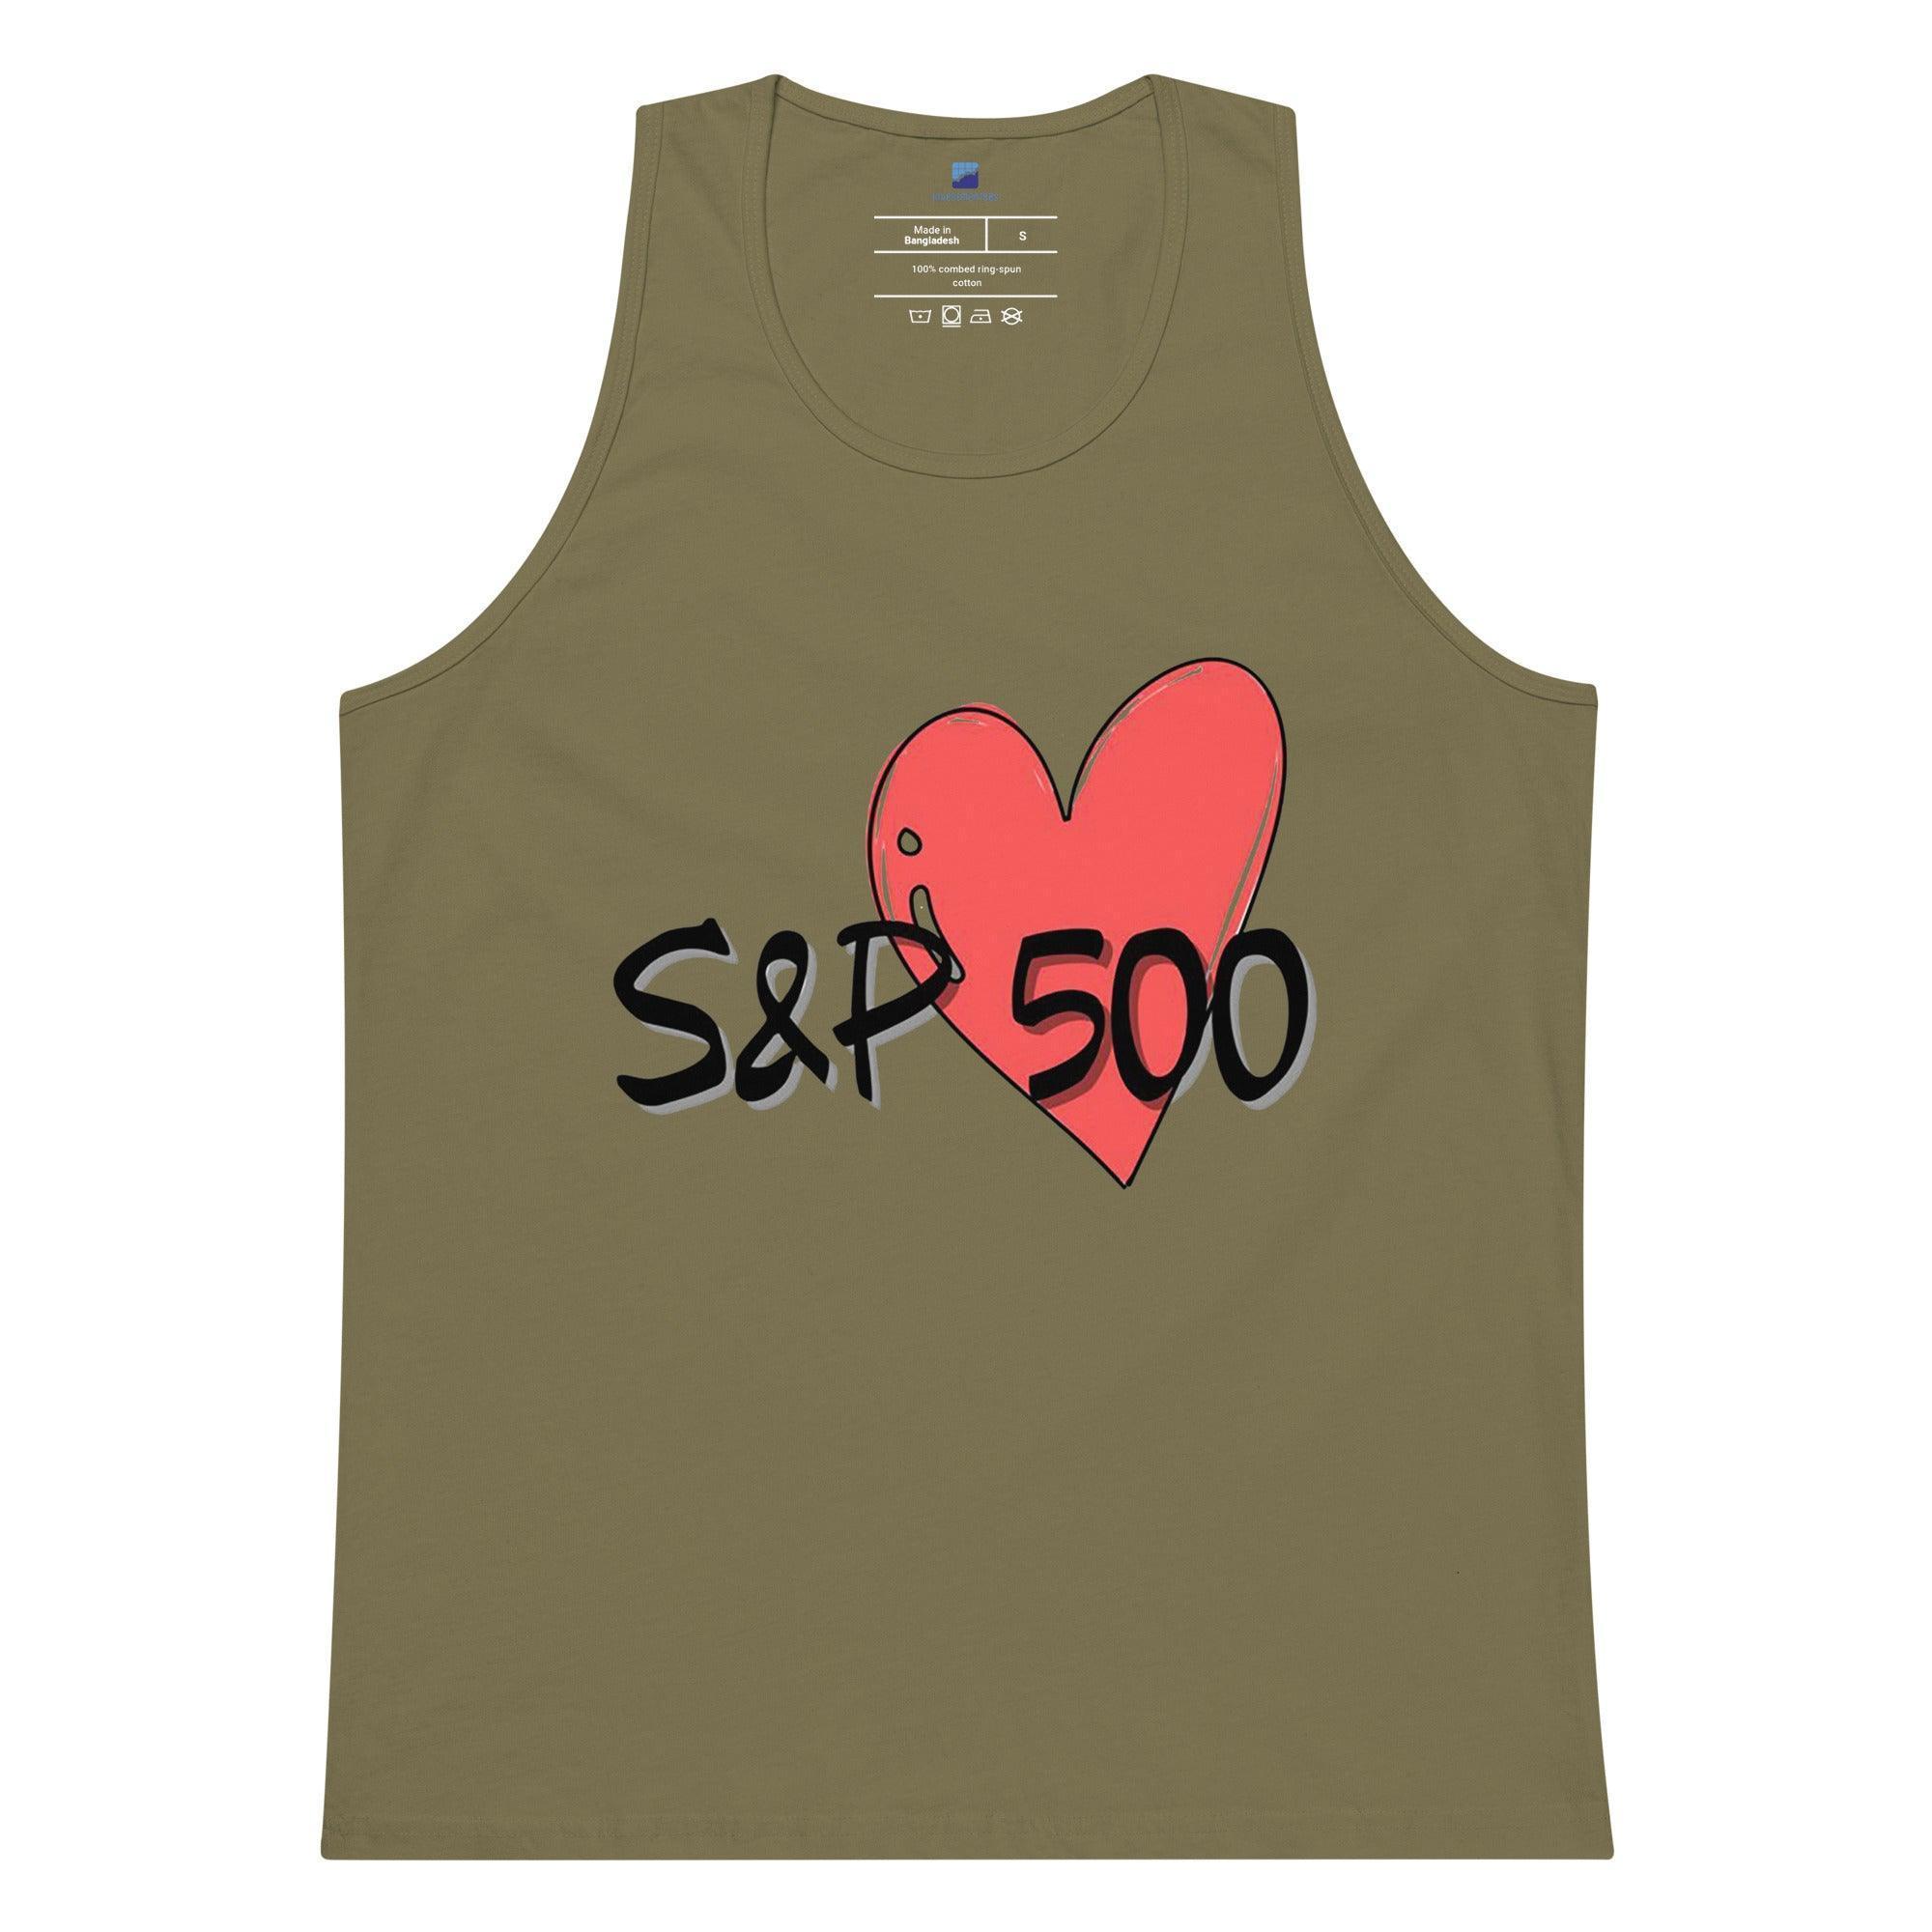 S&P 500 Tank Top - InvestmenTees